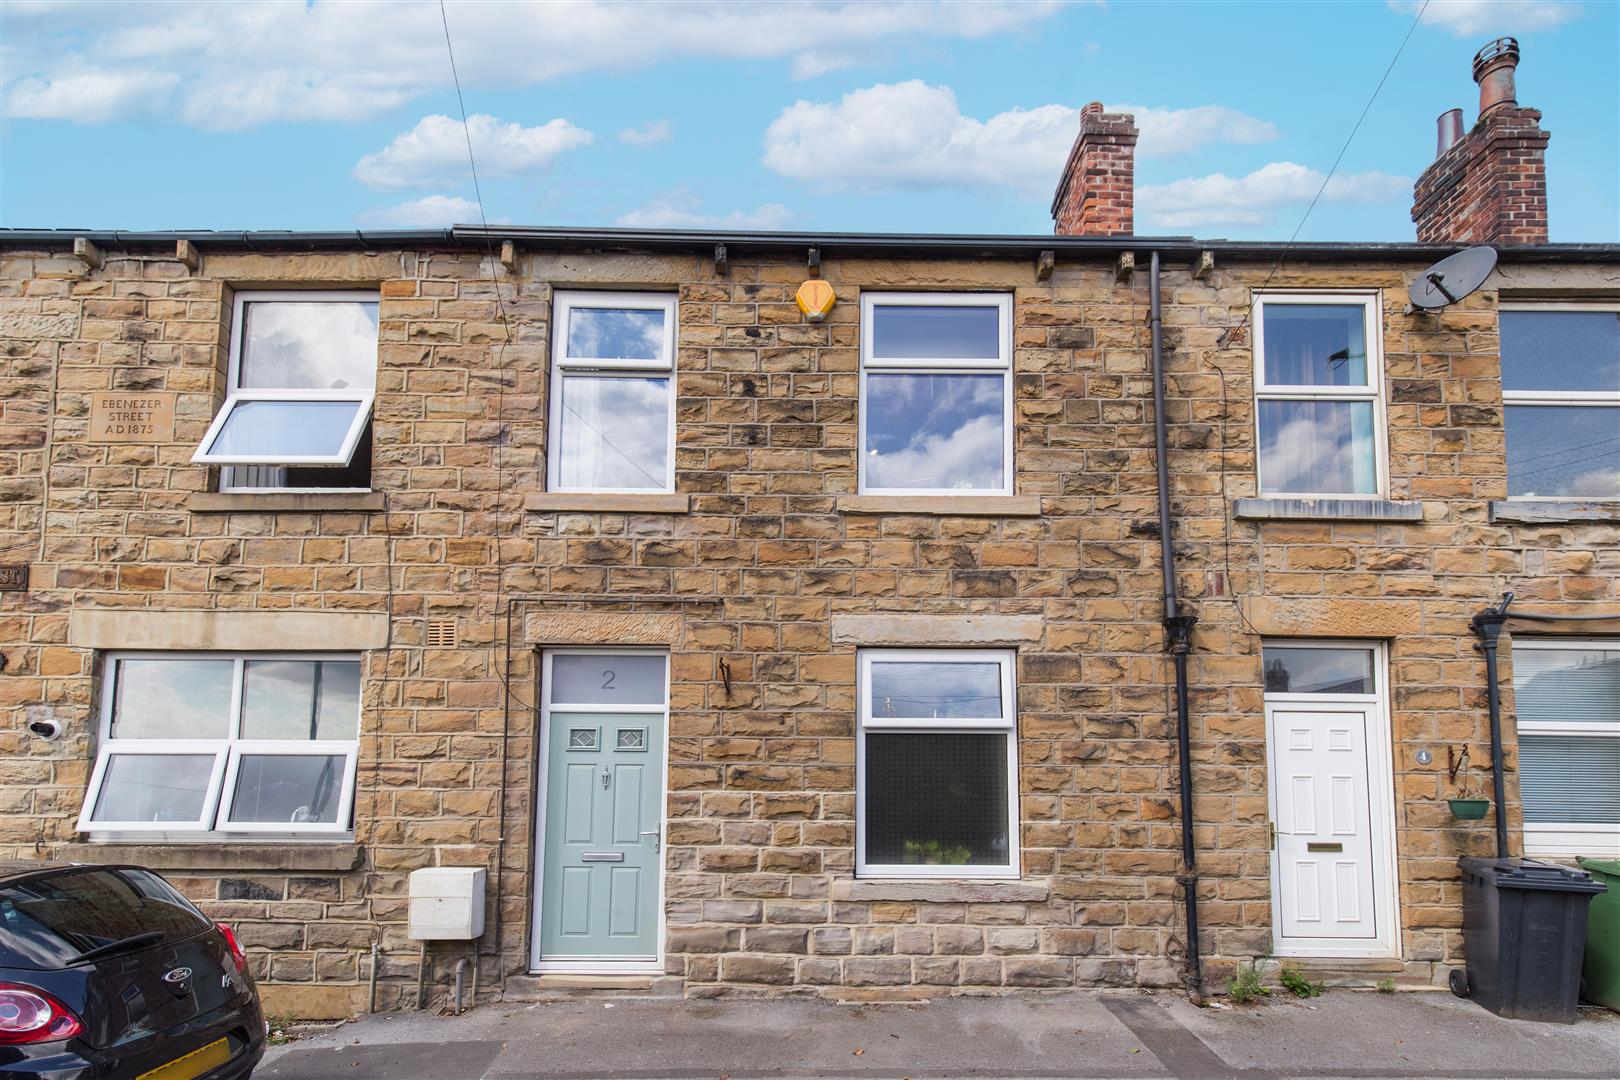 Three bedroom family home in Wakefield West Yorkshire